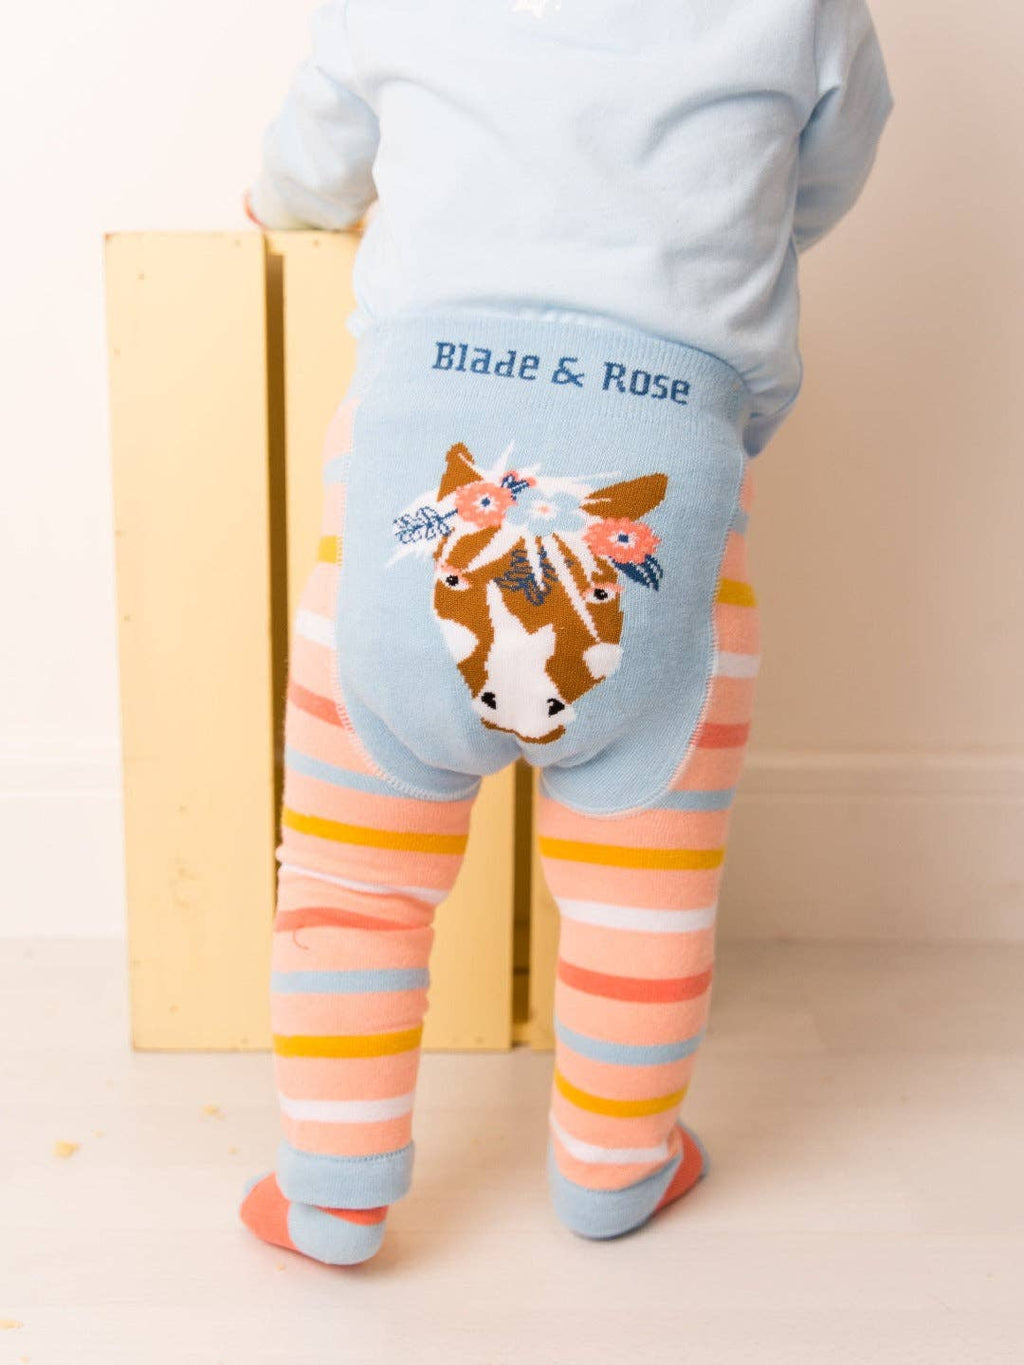 Blade and Rose Bella the Horse Top and Leggings Set - Elves & the Shoemaker